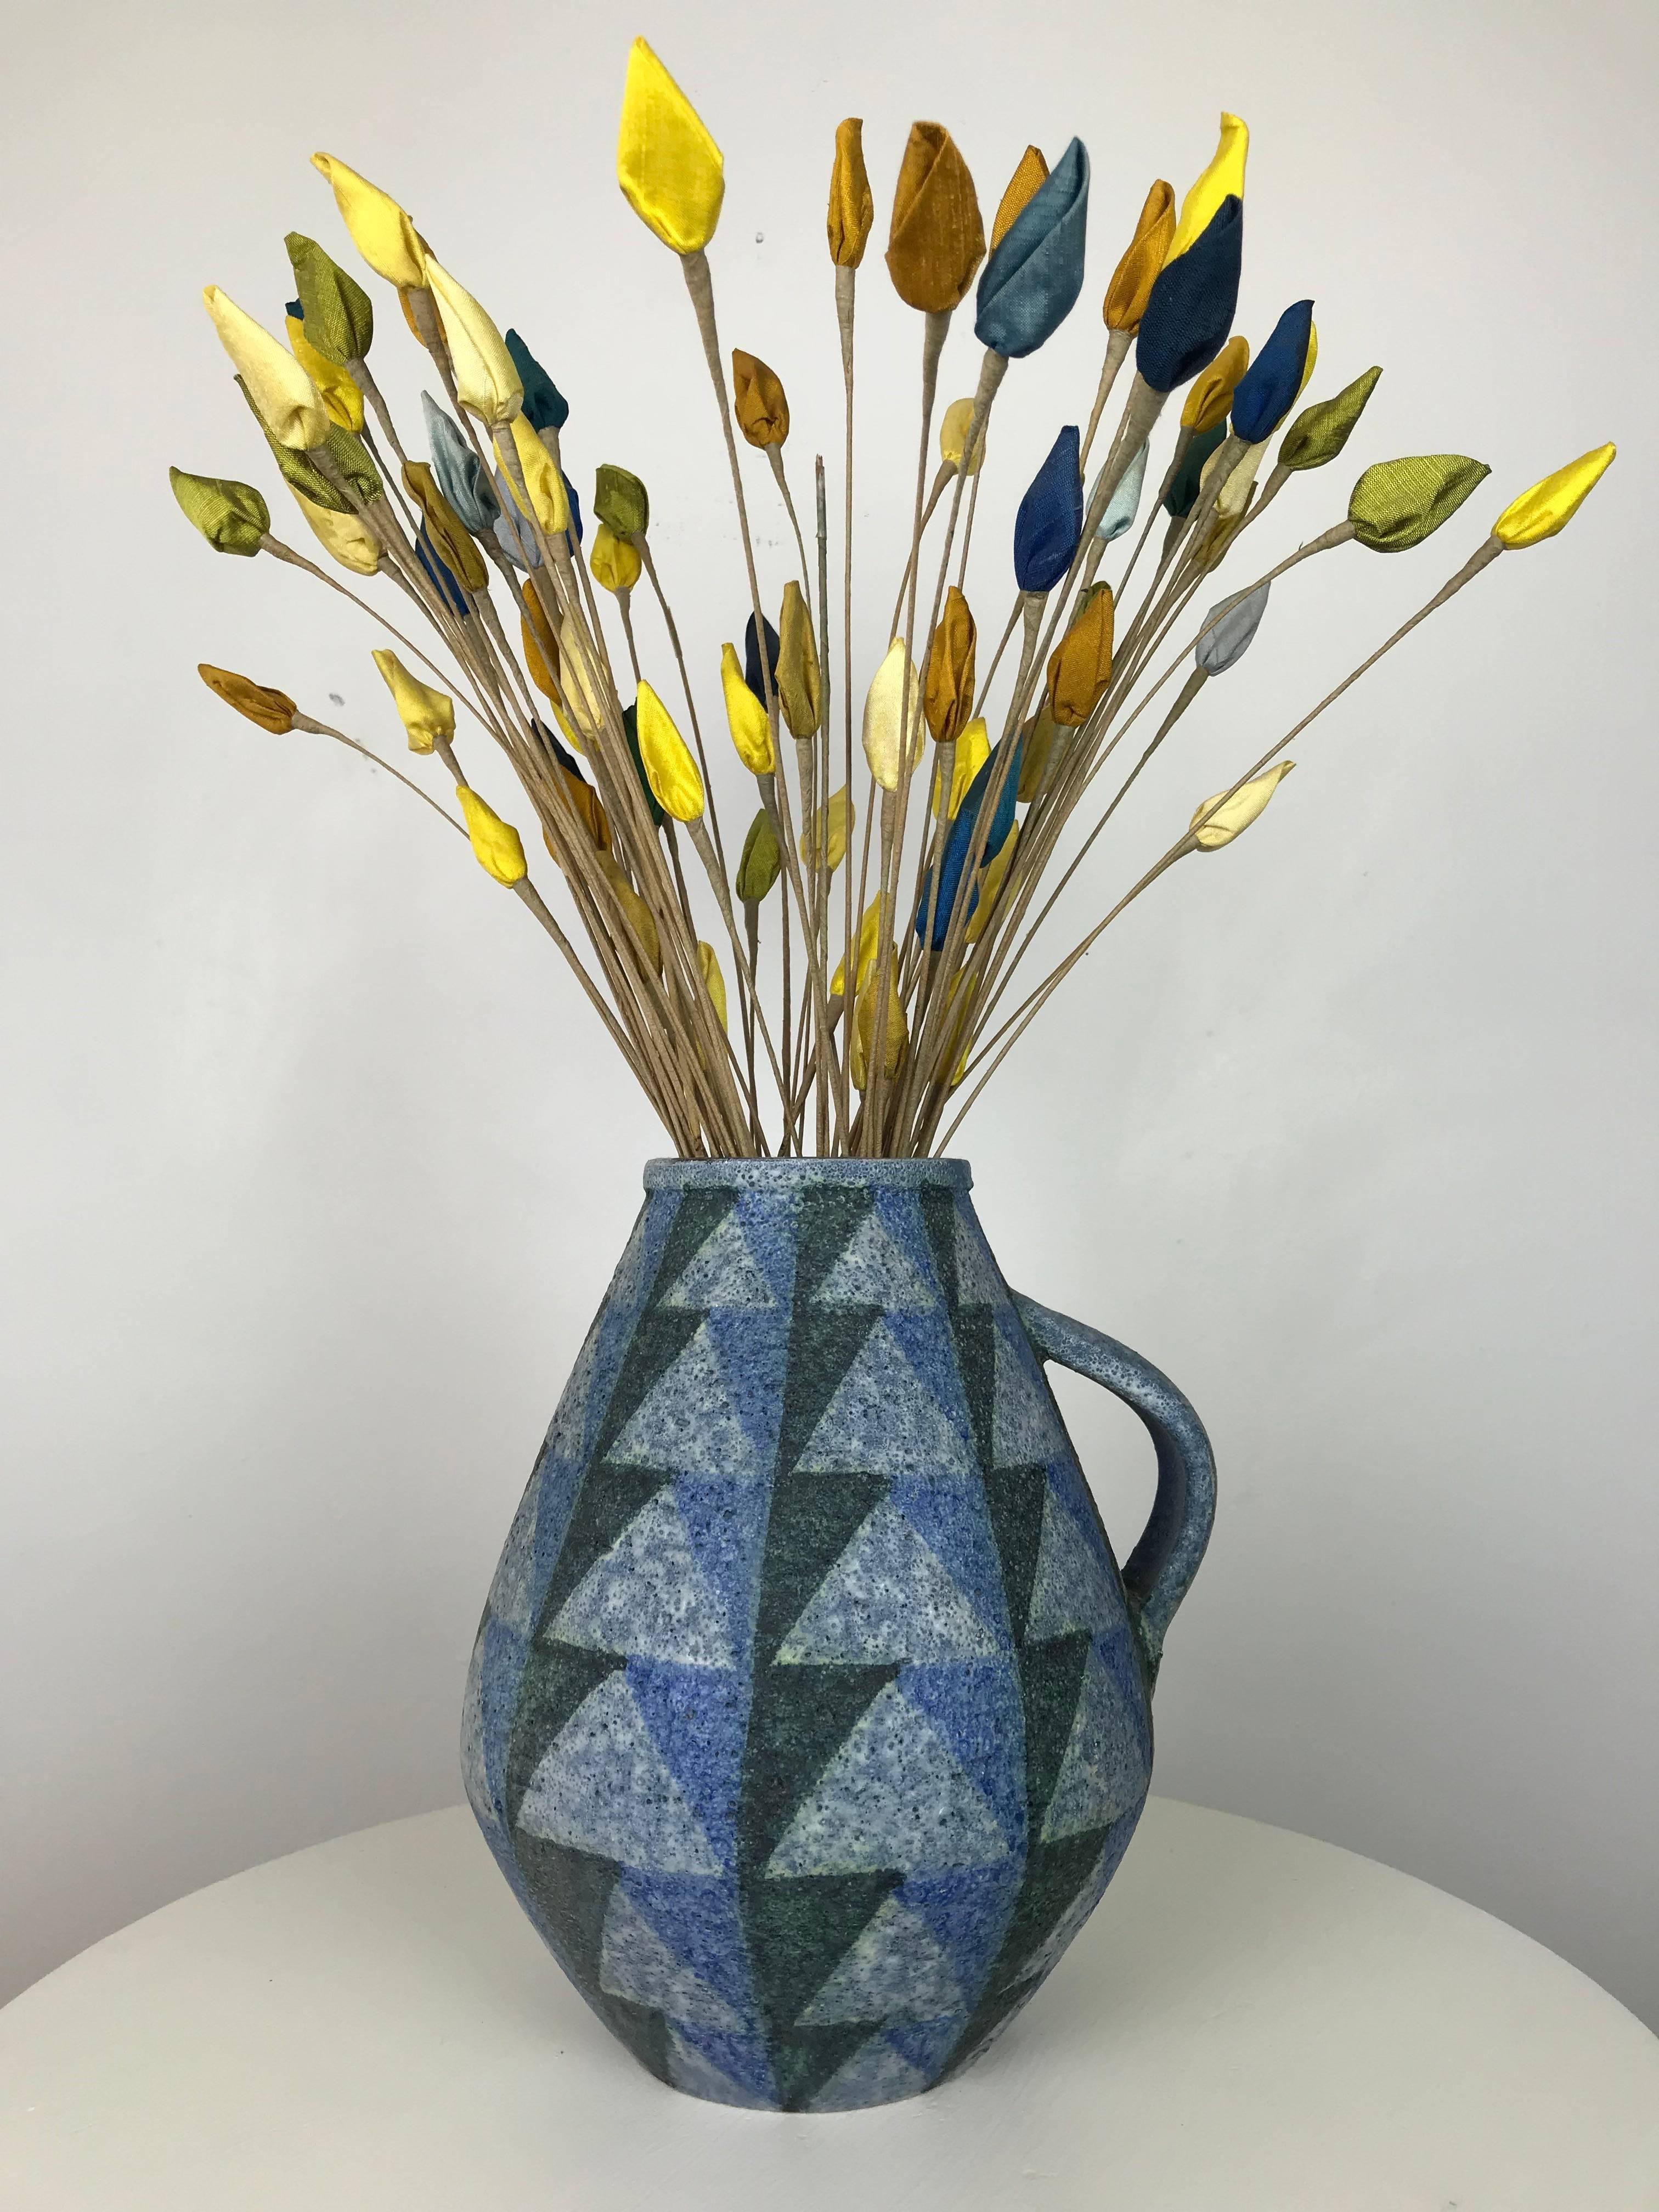 I've used this beautiful display in my residence for years, and it came together when I found a lesser vase at a Mid-Century Modern estate, and they contained these vintage modernist flowers made of fabric wrapped wood, and married them with this